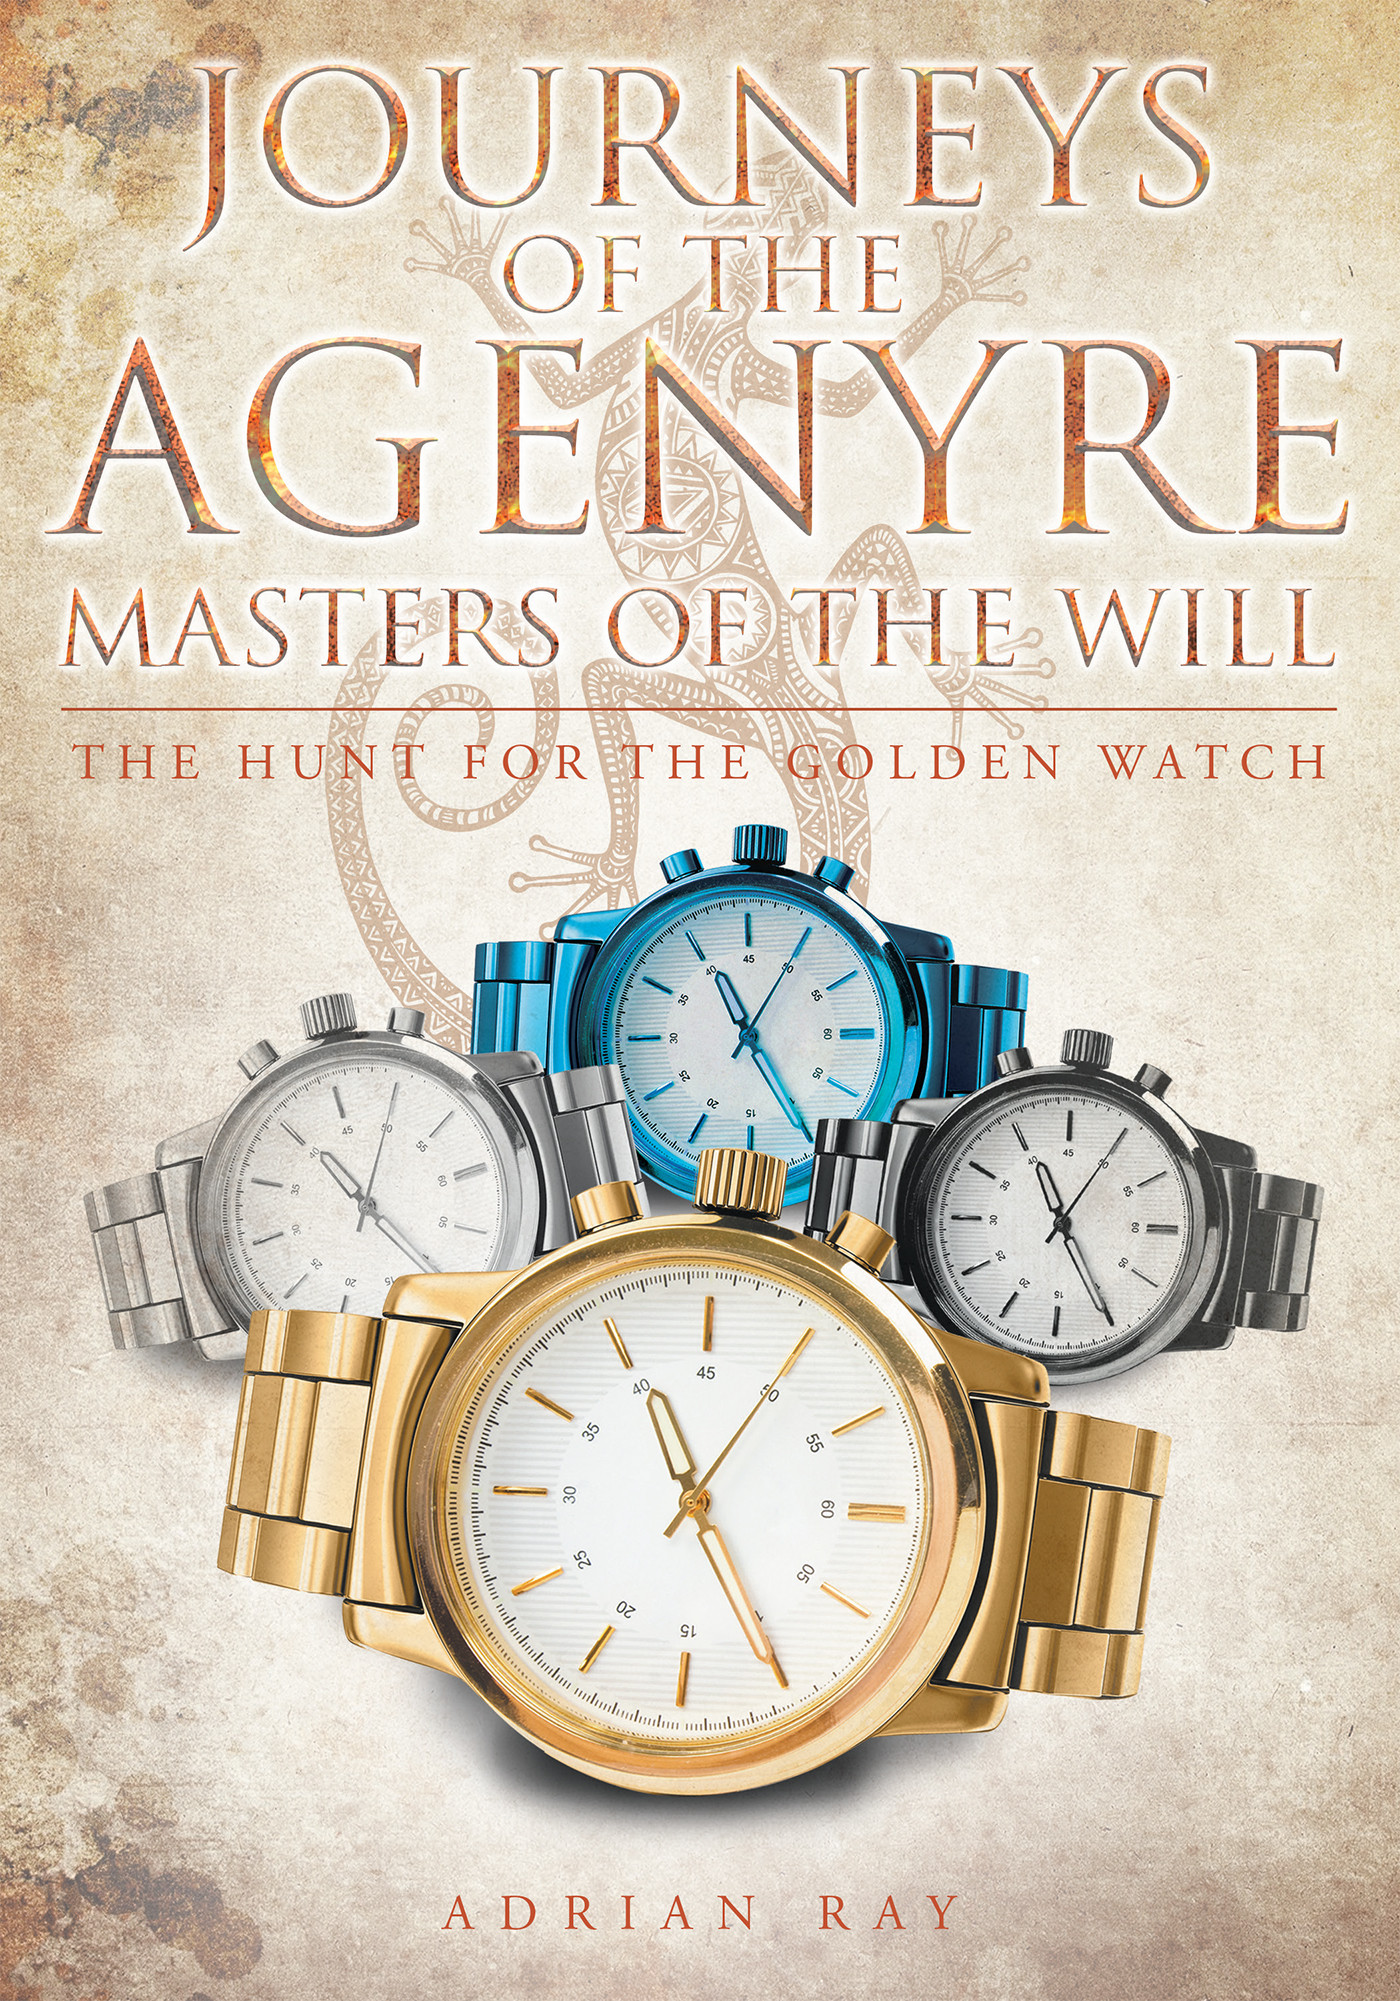 Journeys of the Agenyre-Masters of the Will Cover Image